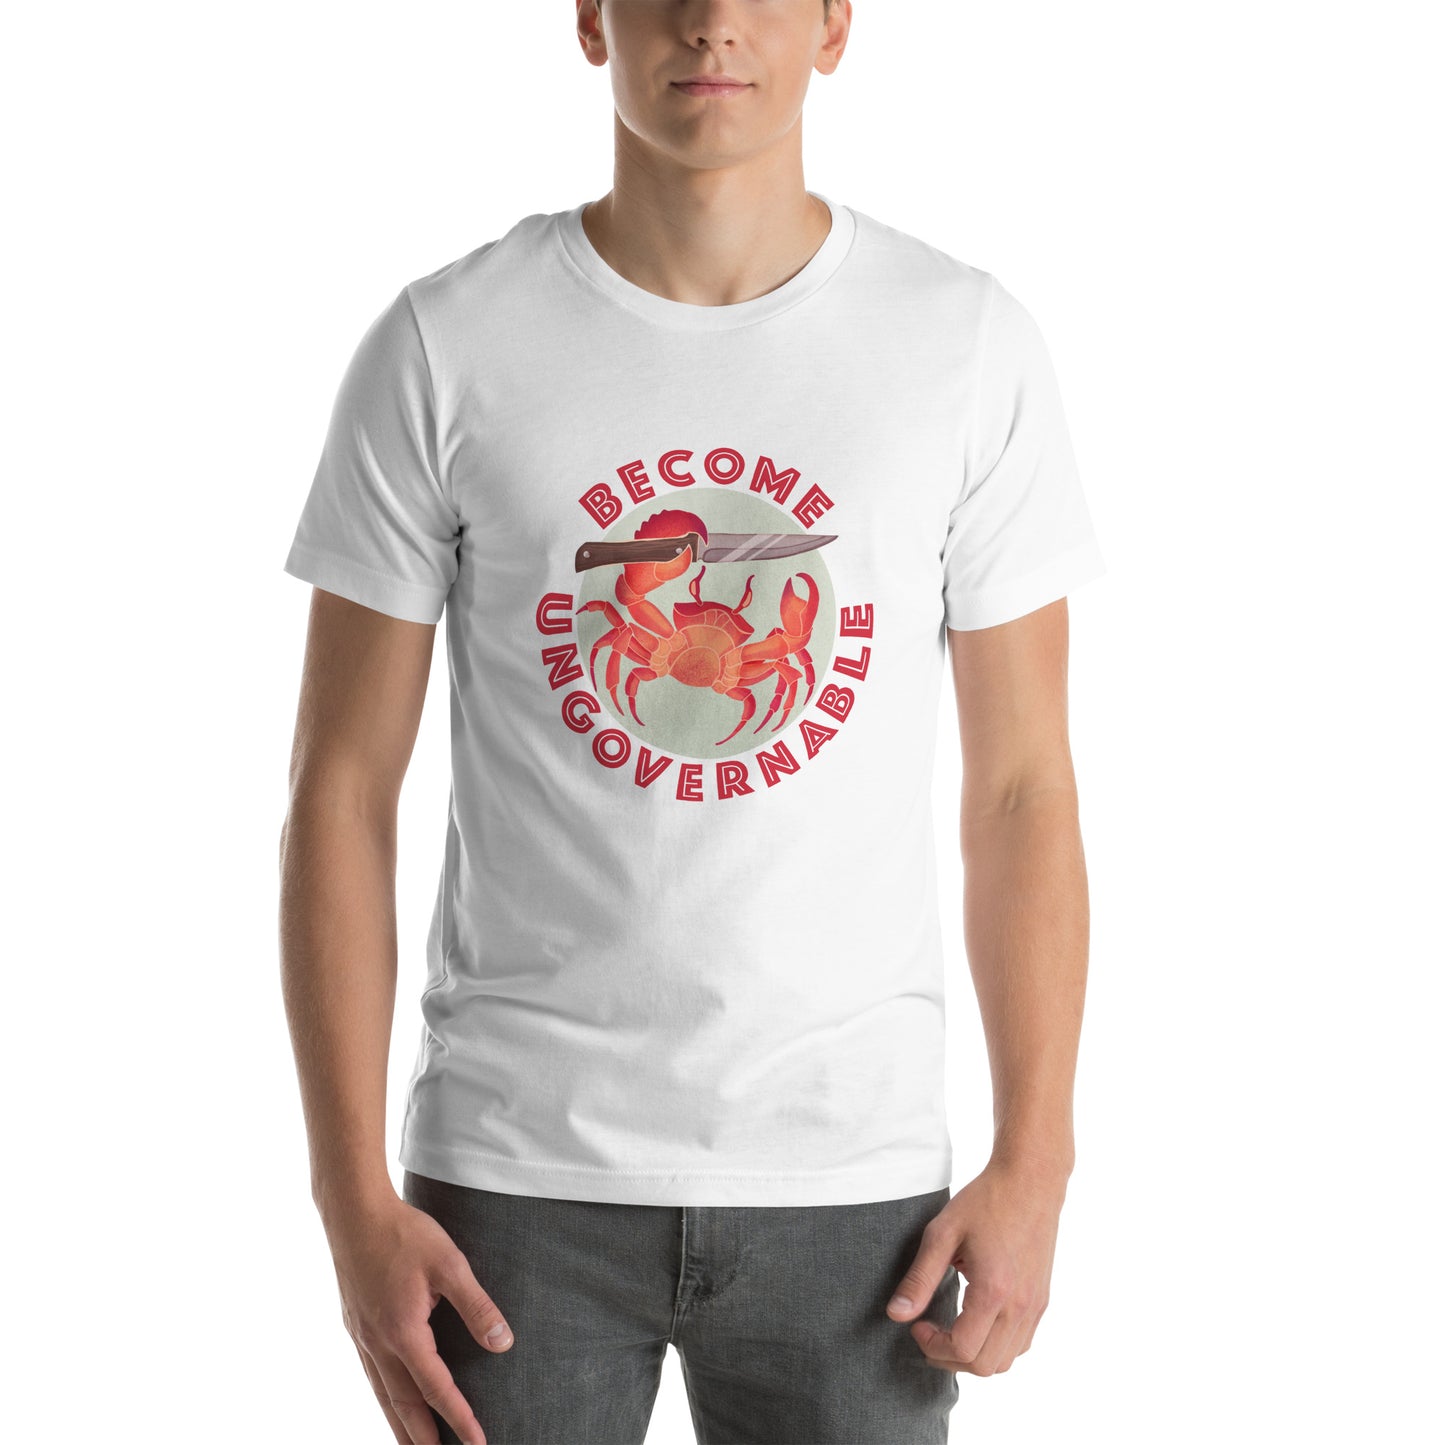 Unisex t-shirt- become ungovernable